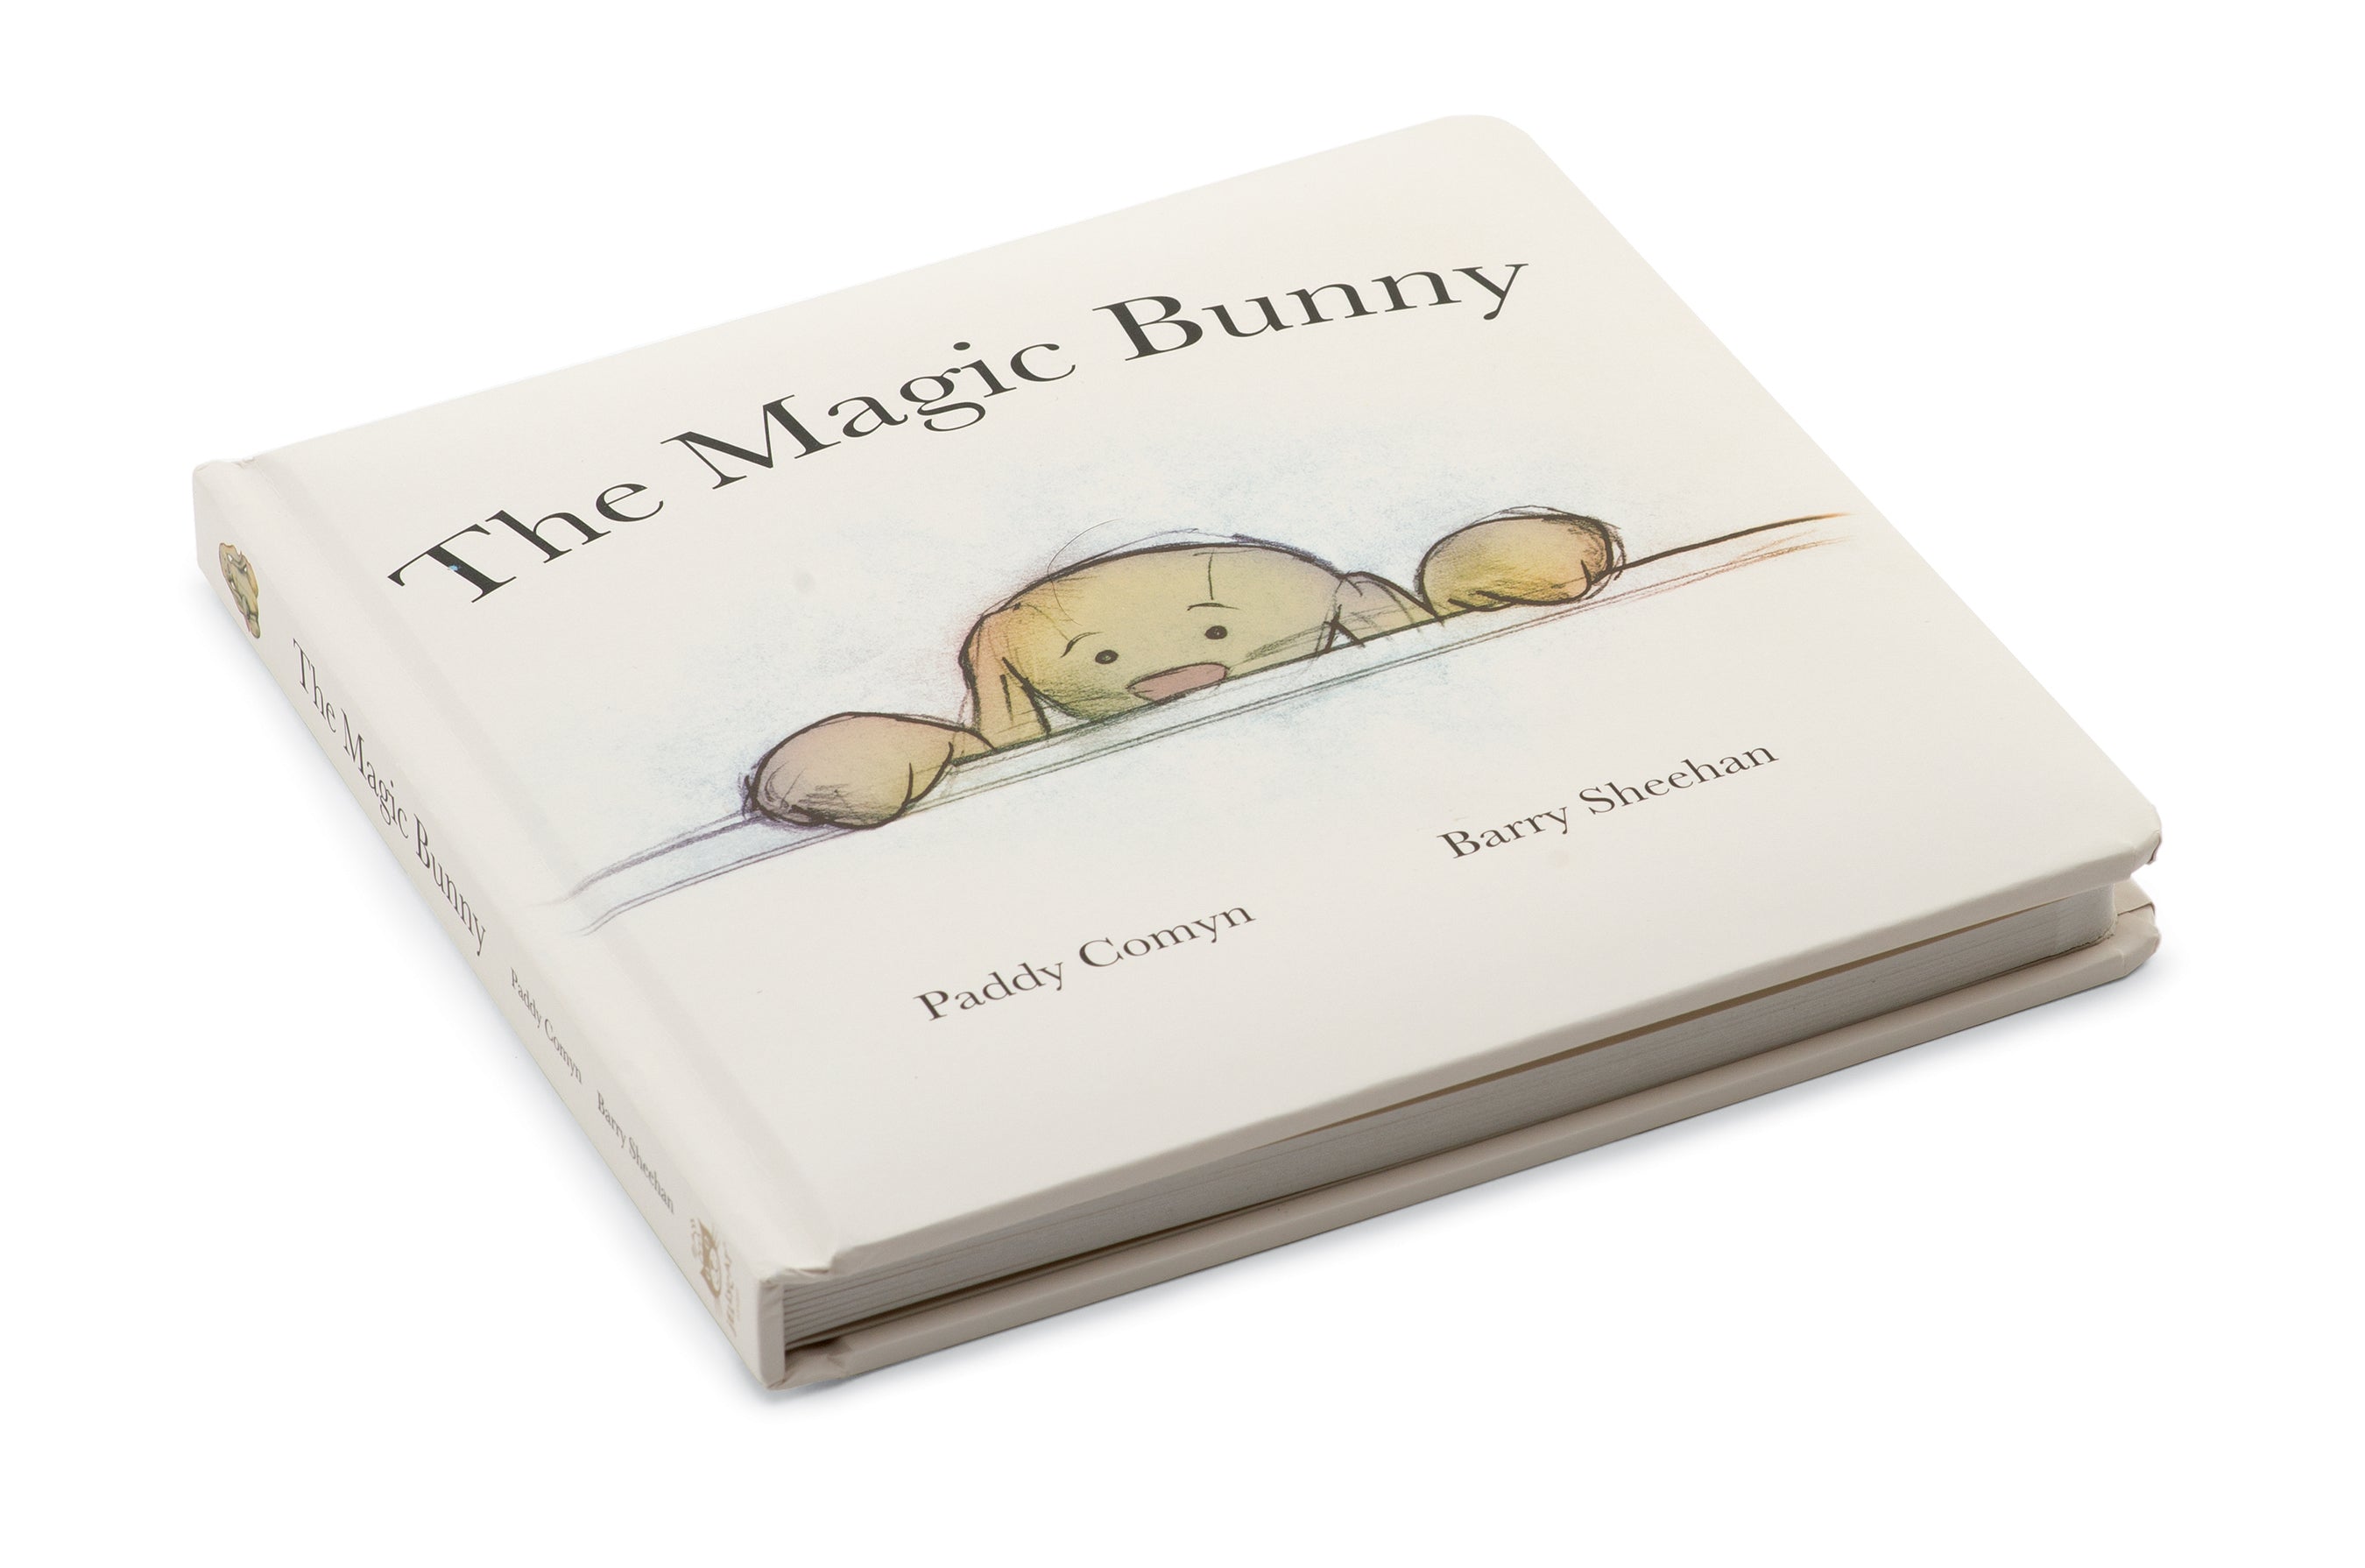 THE MAGIC BUNNY BOOK by JELLYCAT